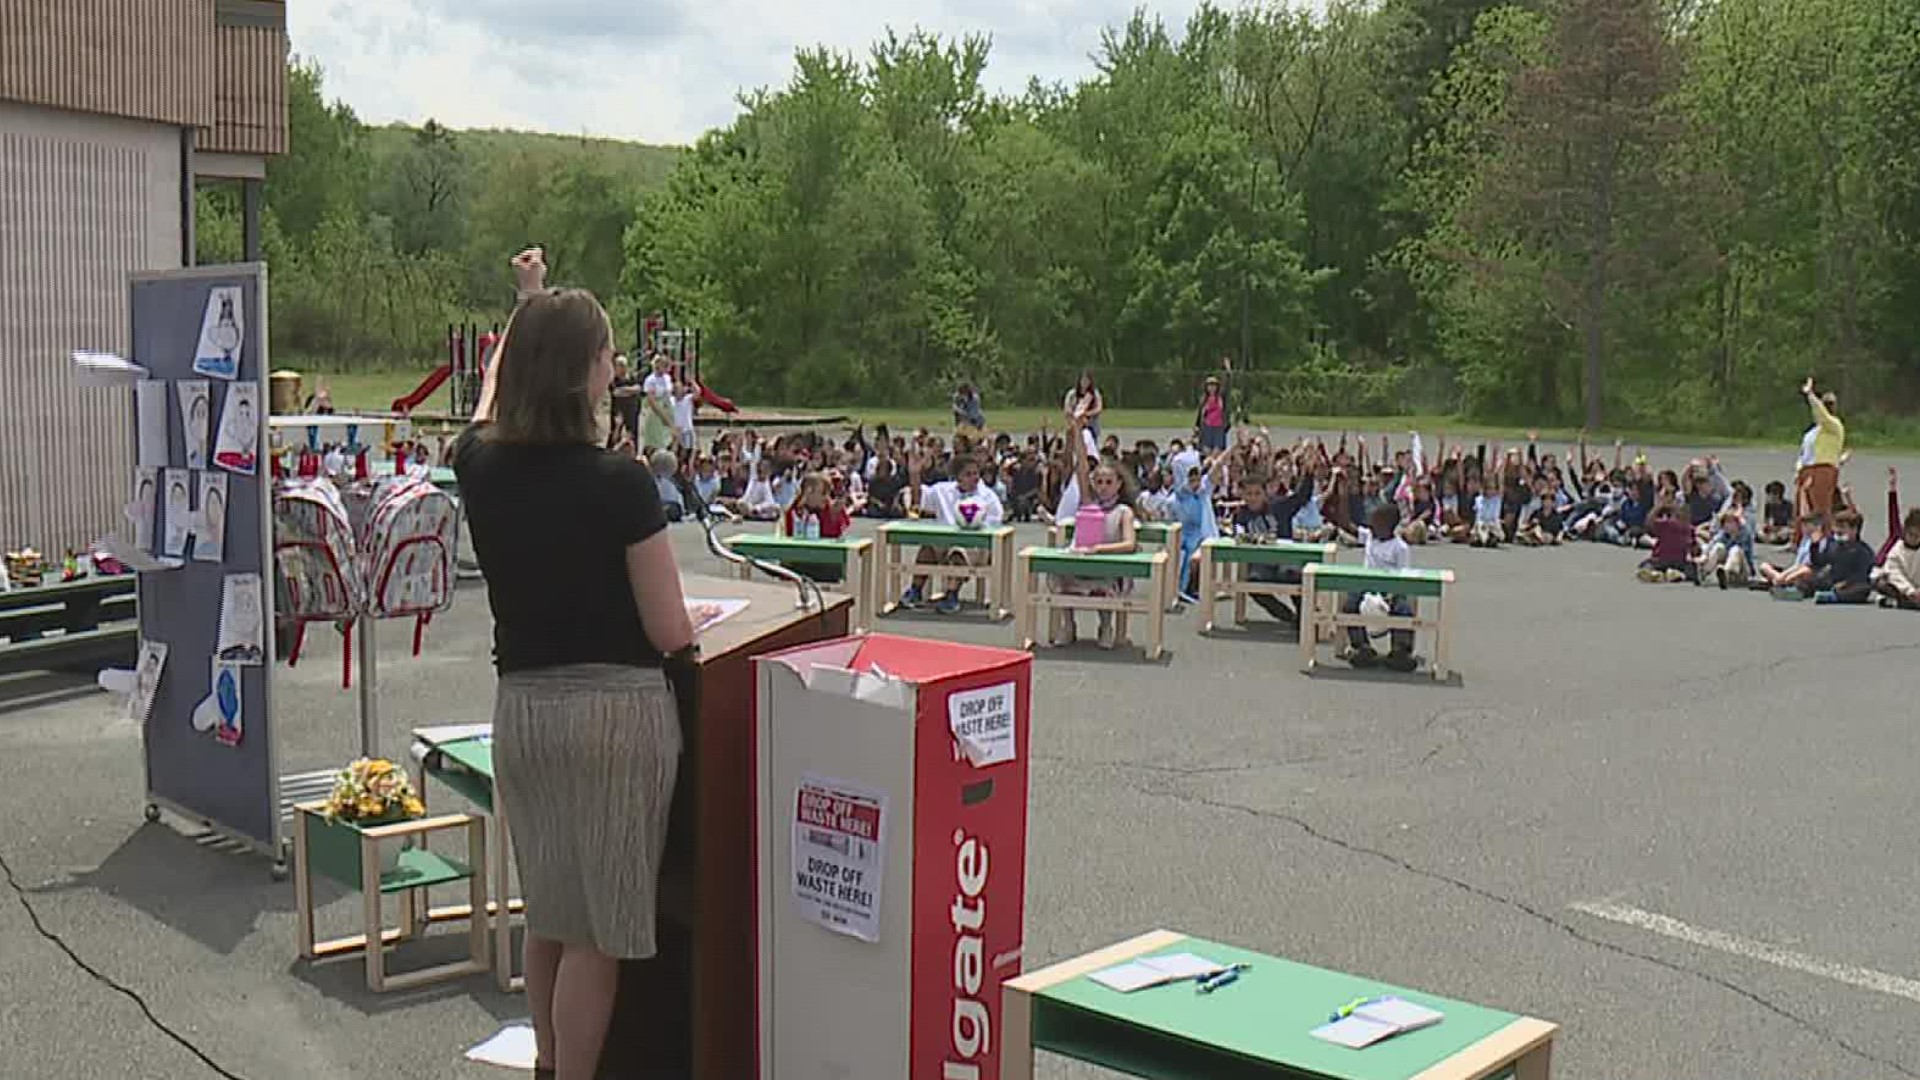 A school in Scranton received an award Monday for going above and beyond with its recycling efforts.